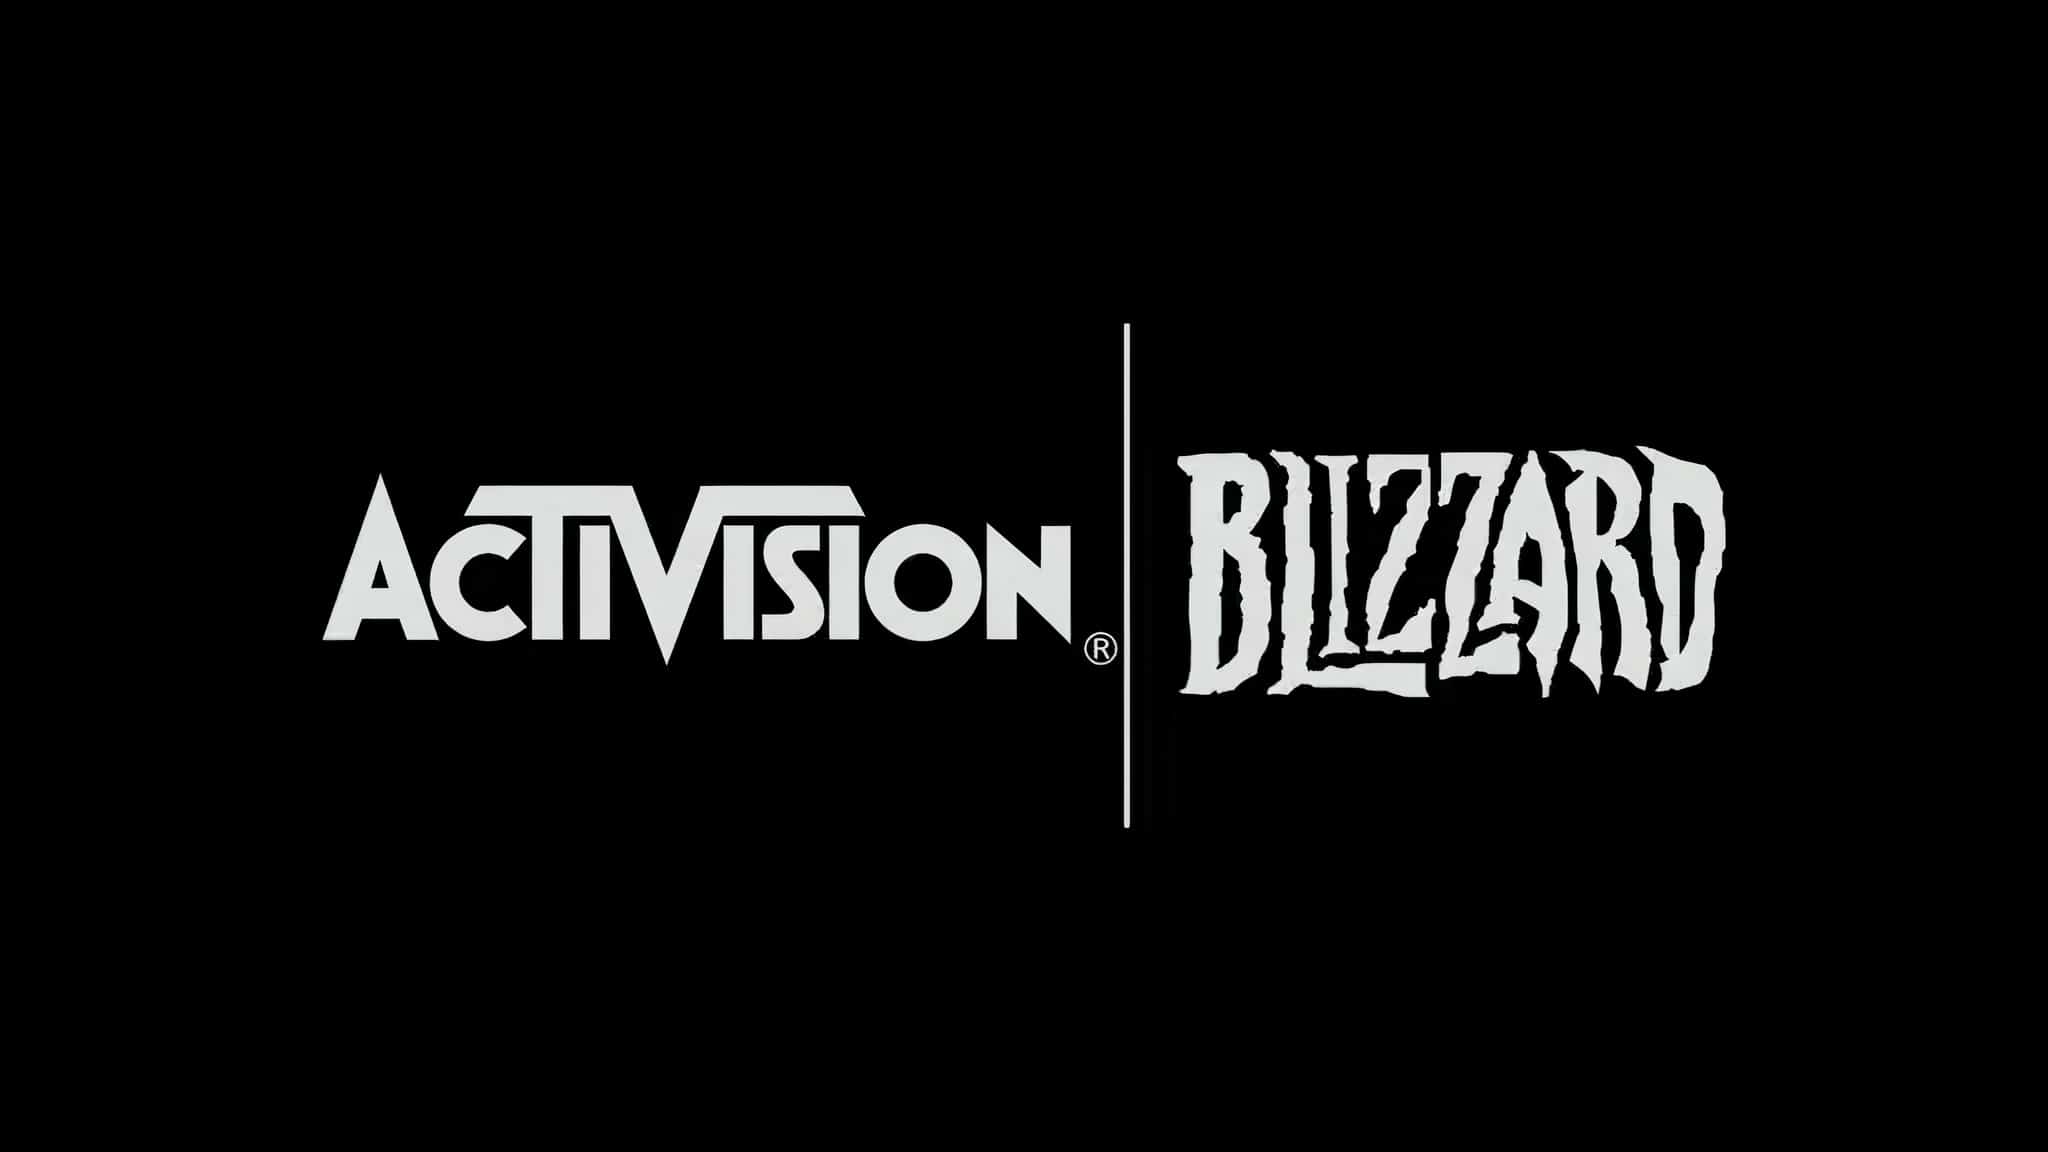 Geoff Keighley – Activision Blizzard not a part of The Game Awards 2021